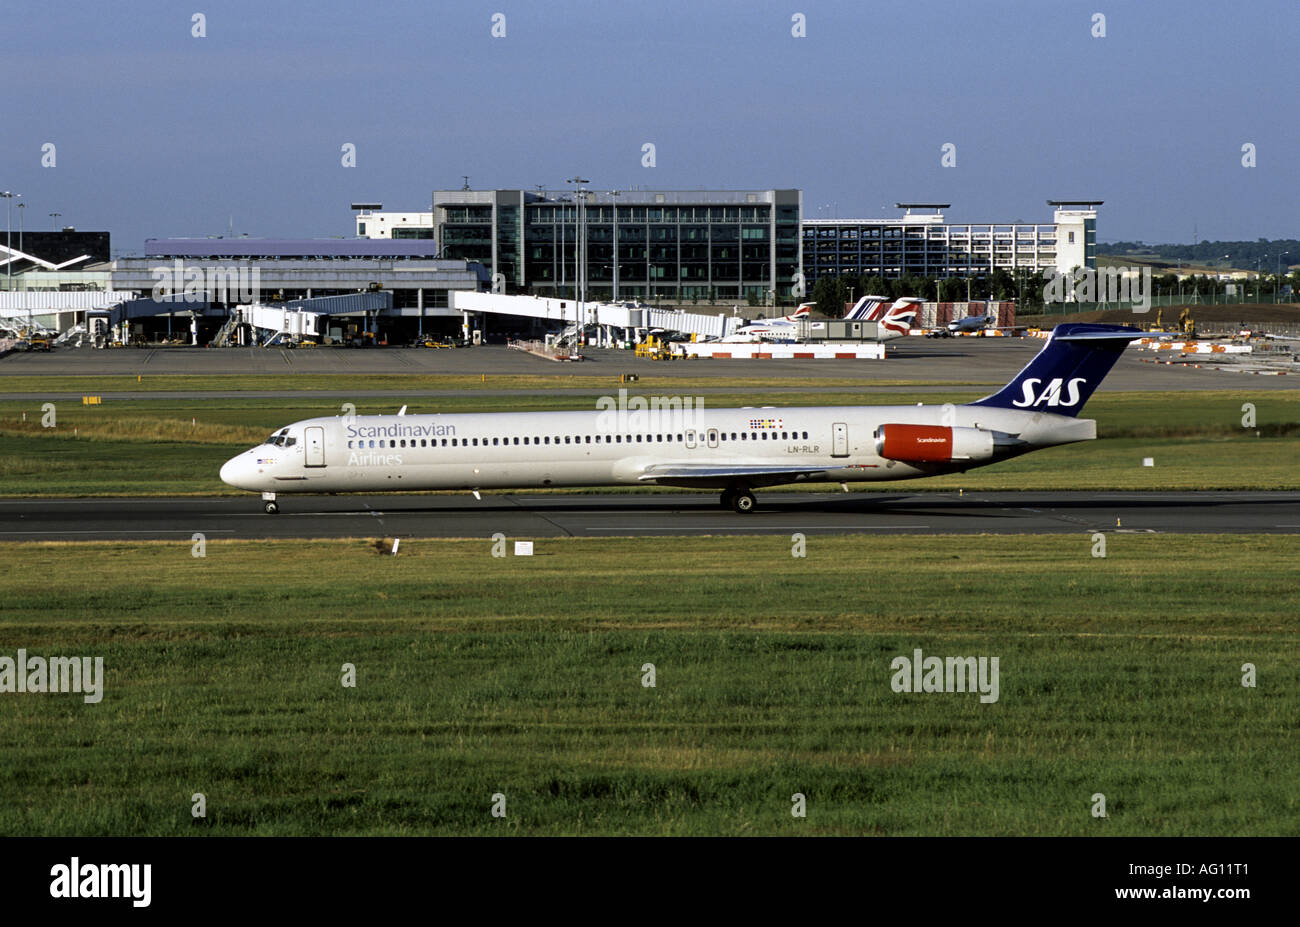 SAS McDonnell Douglas MD 82 aircraft about to take off at Birmingham International Airport, West Midlands, UK Stock Photo